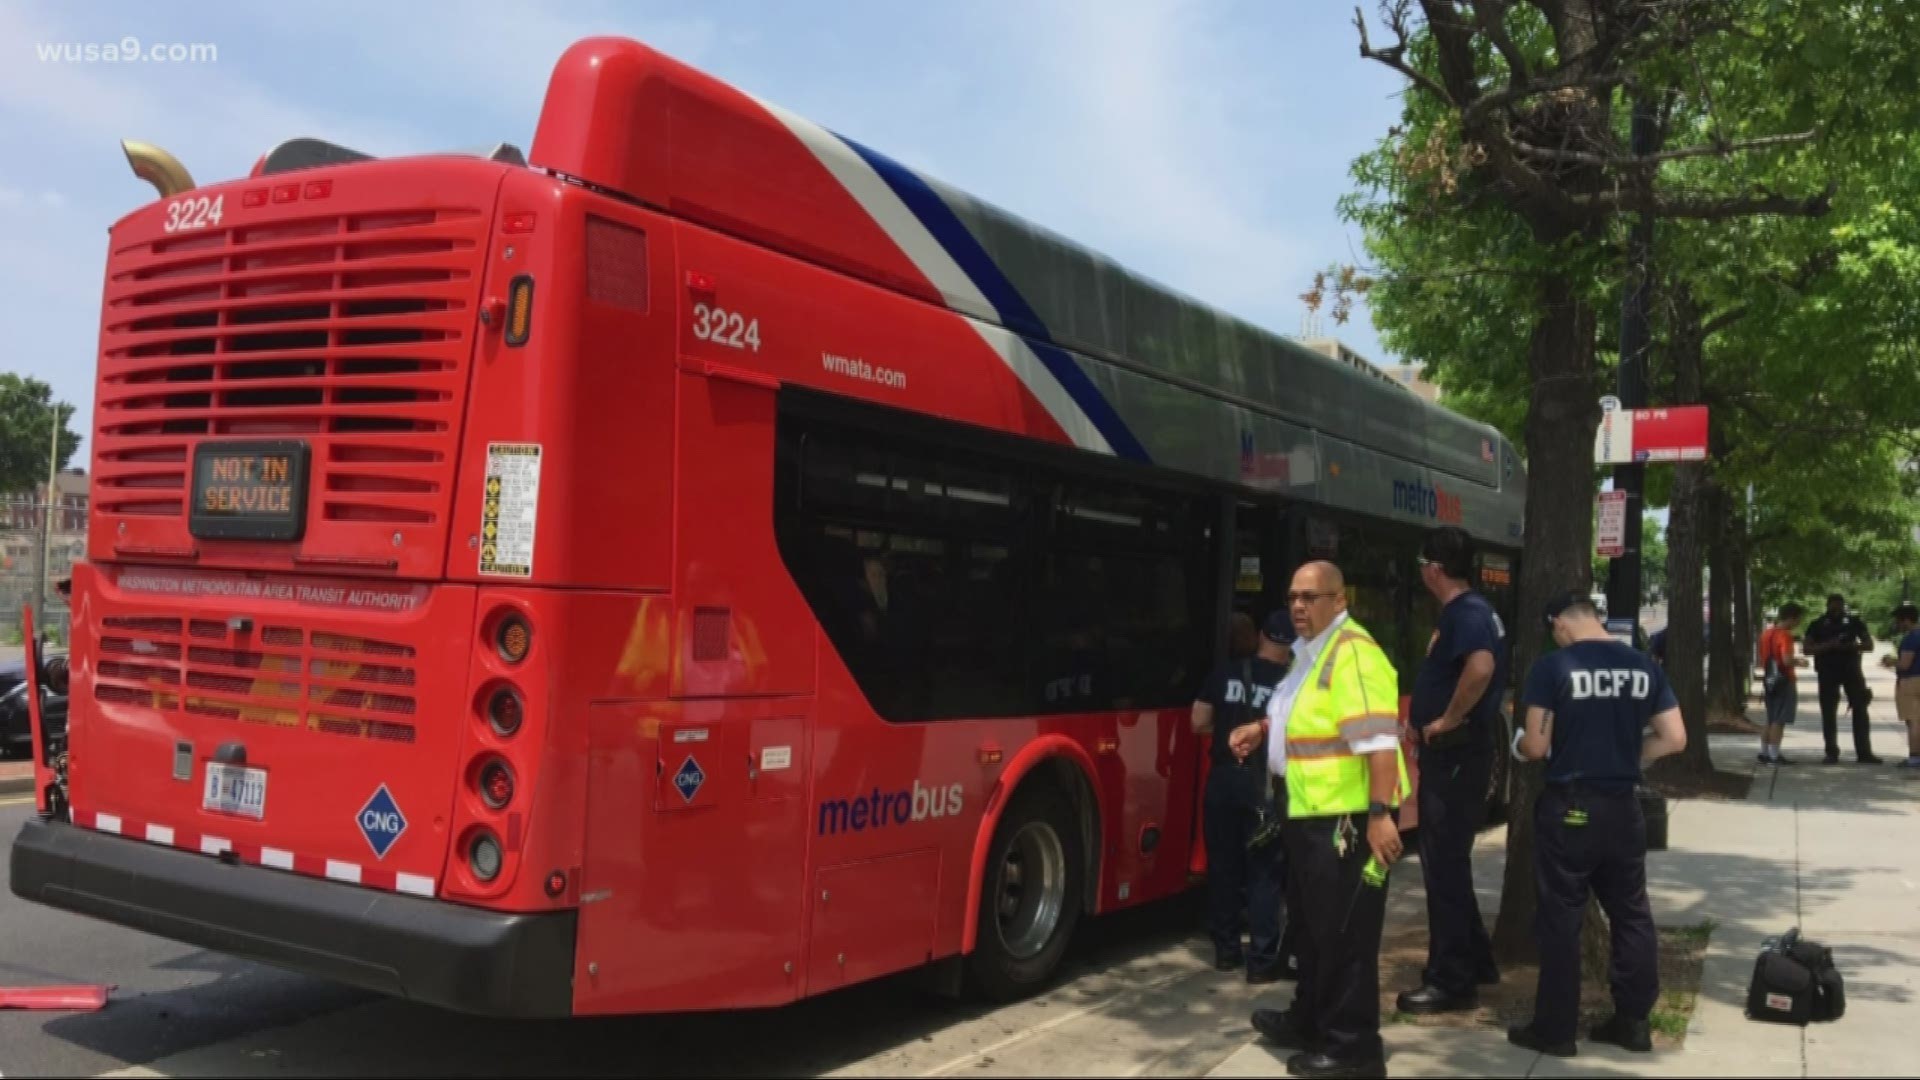 Ten people are injured following a crash involving a truck and a D.C. Metrobus. The crash happened in the 1000 block of N. St., Northeast around 12:12 p.m. Saturday, officials said.